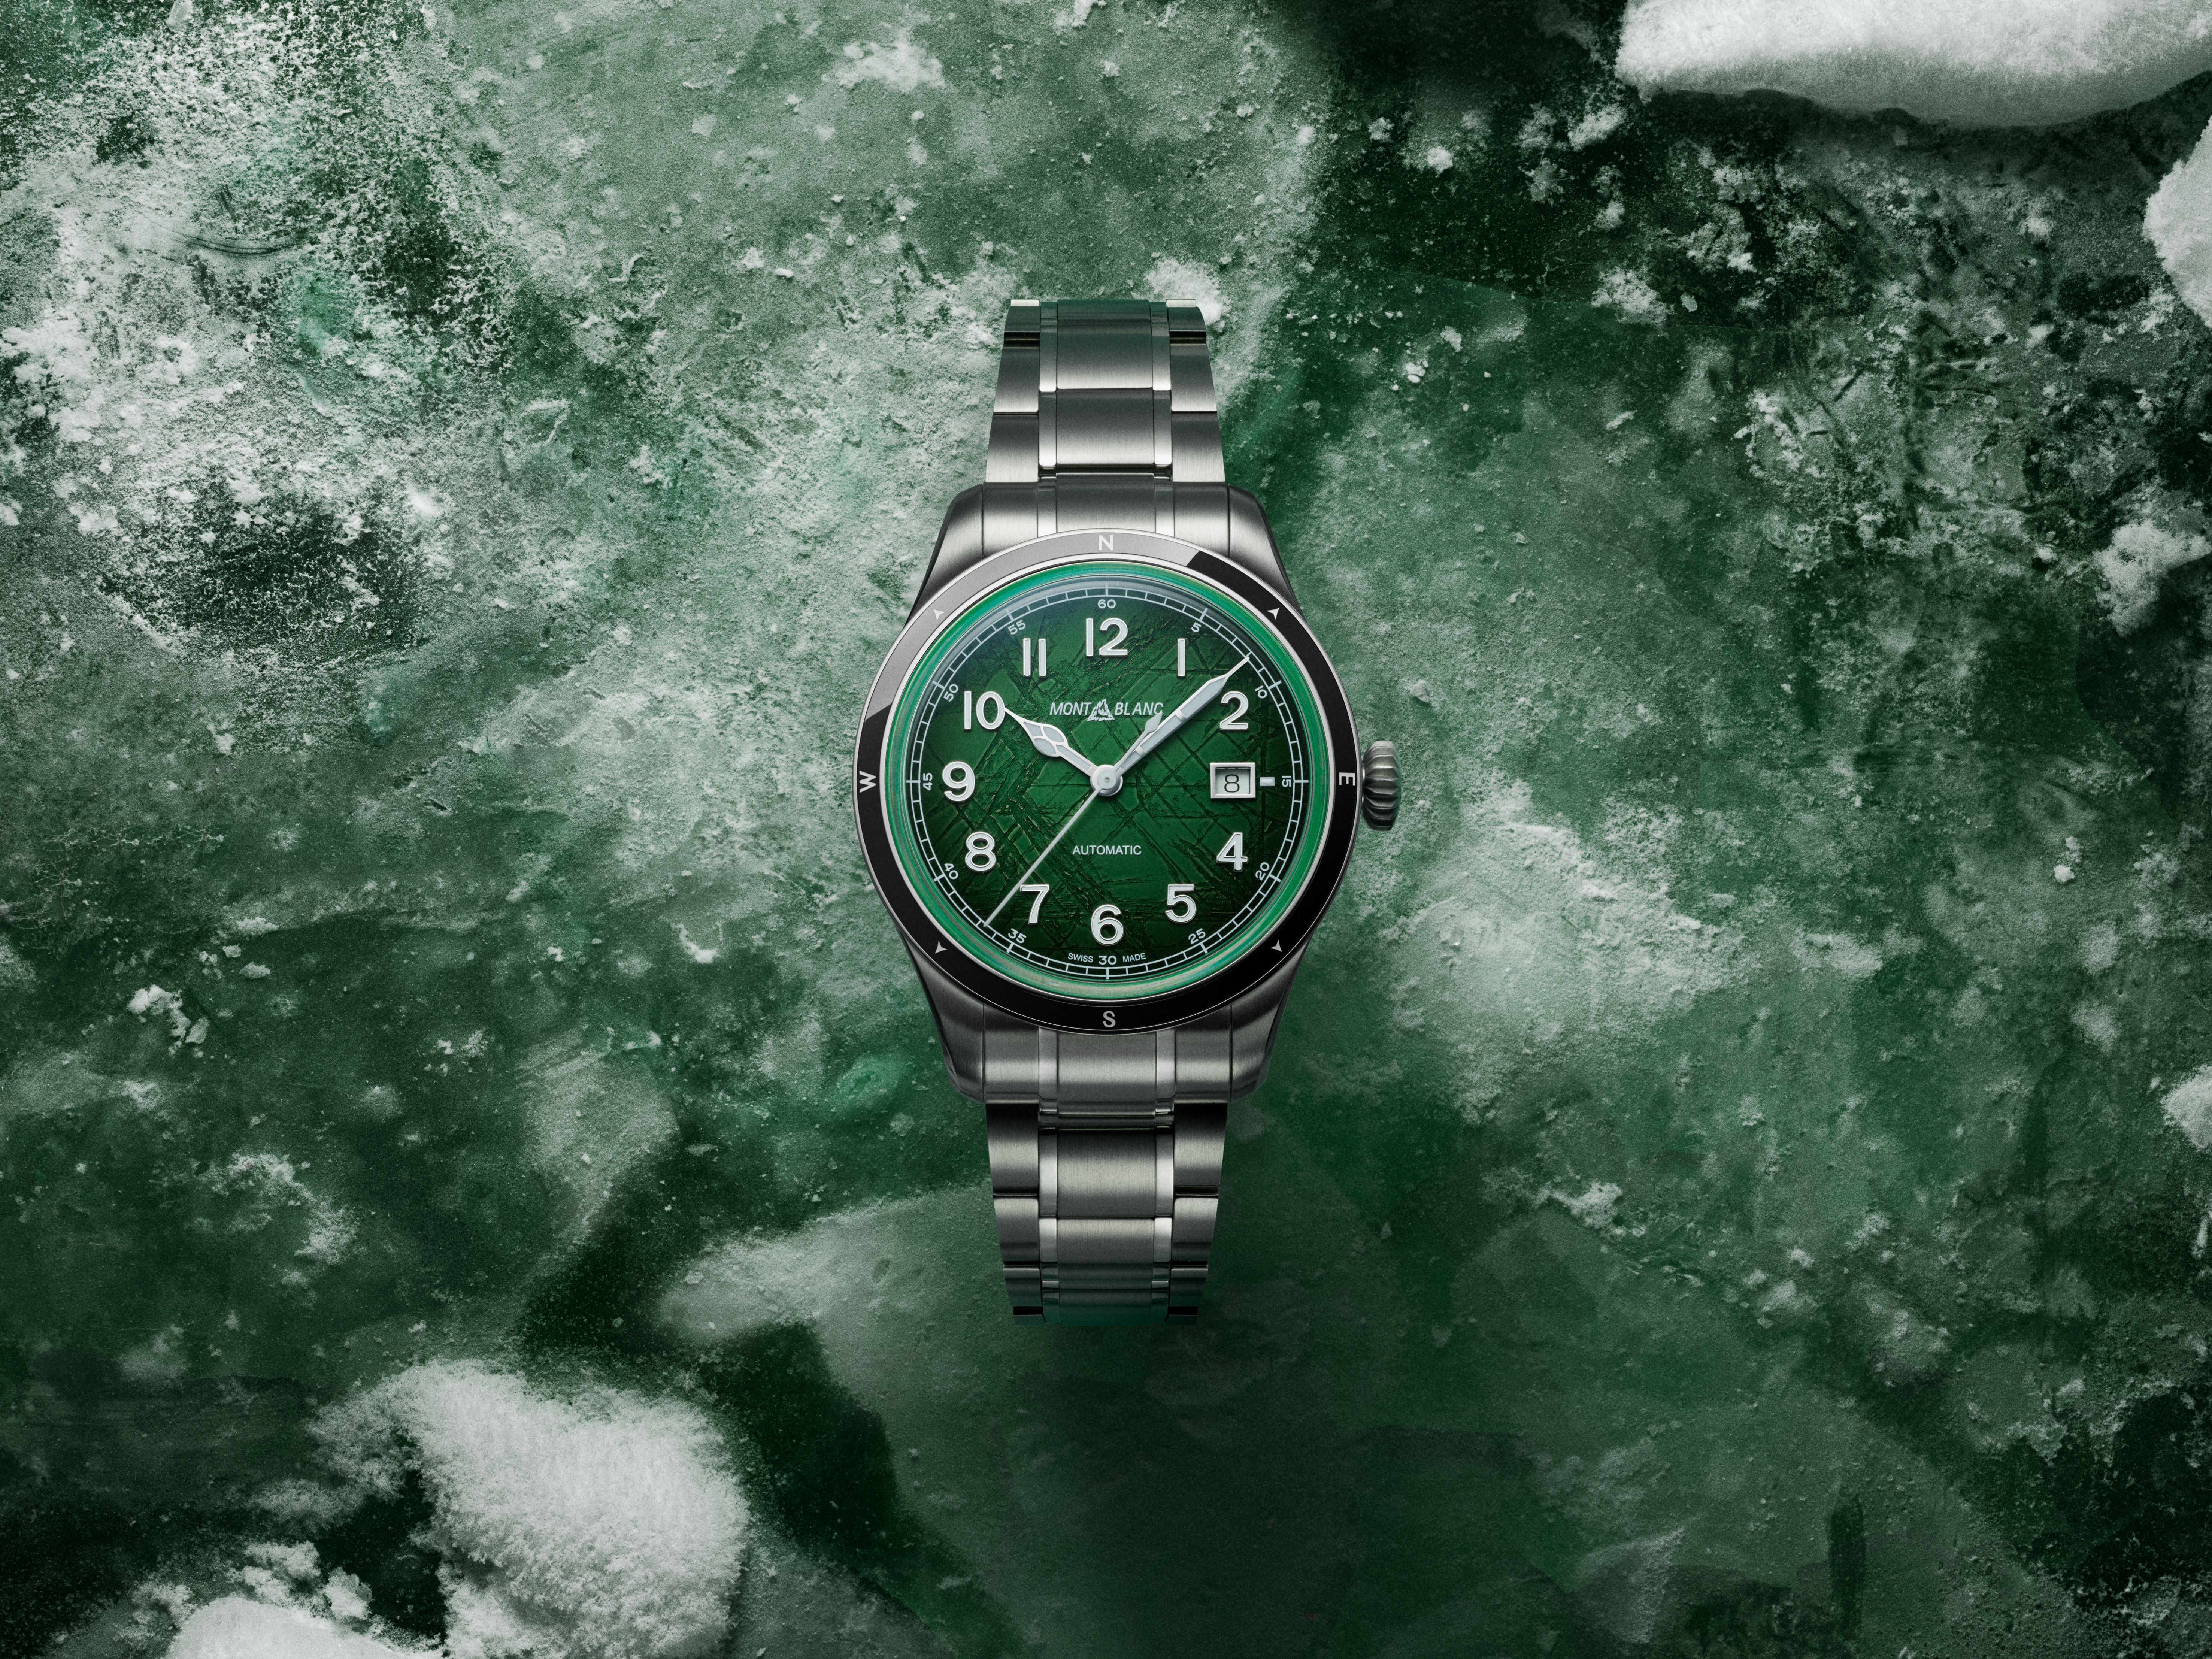 The collection is inspired by the emerald icebergs of the glacial Southern Ocean surrounding Antarctica